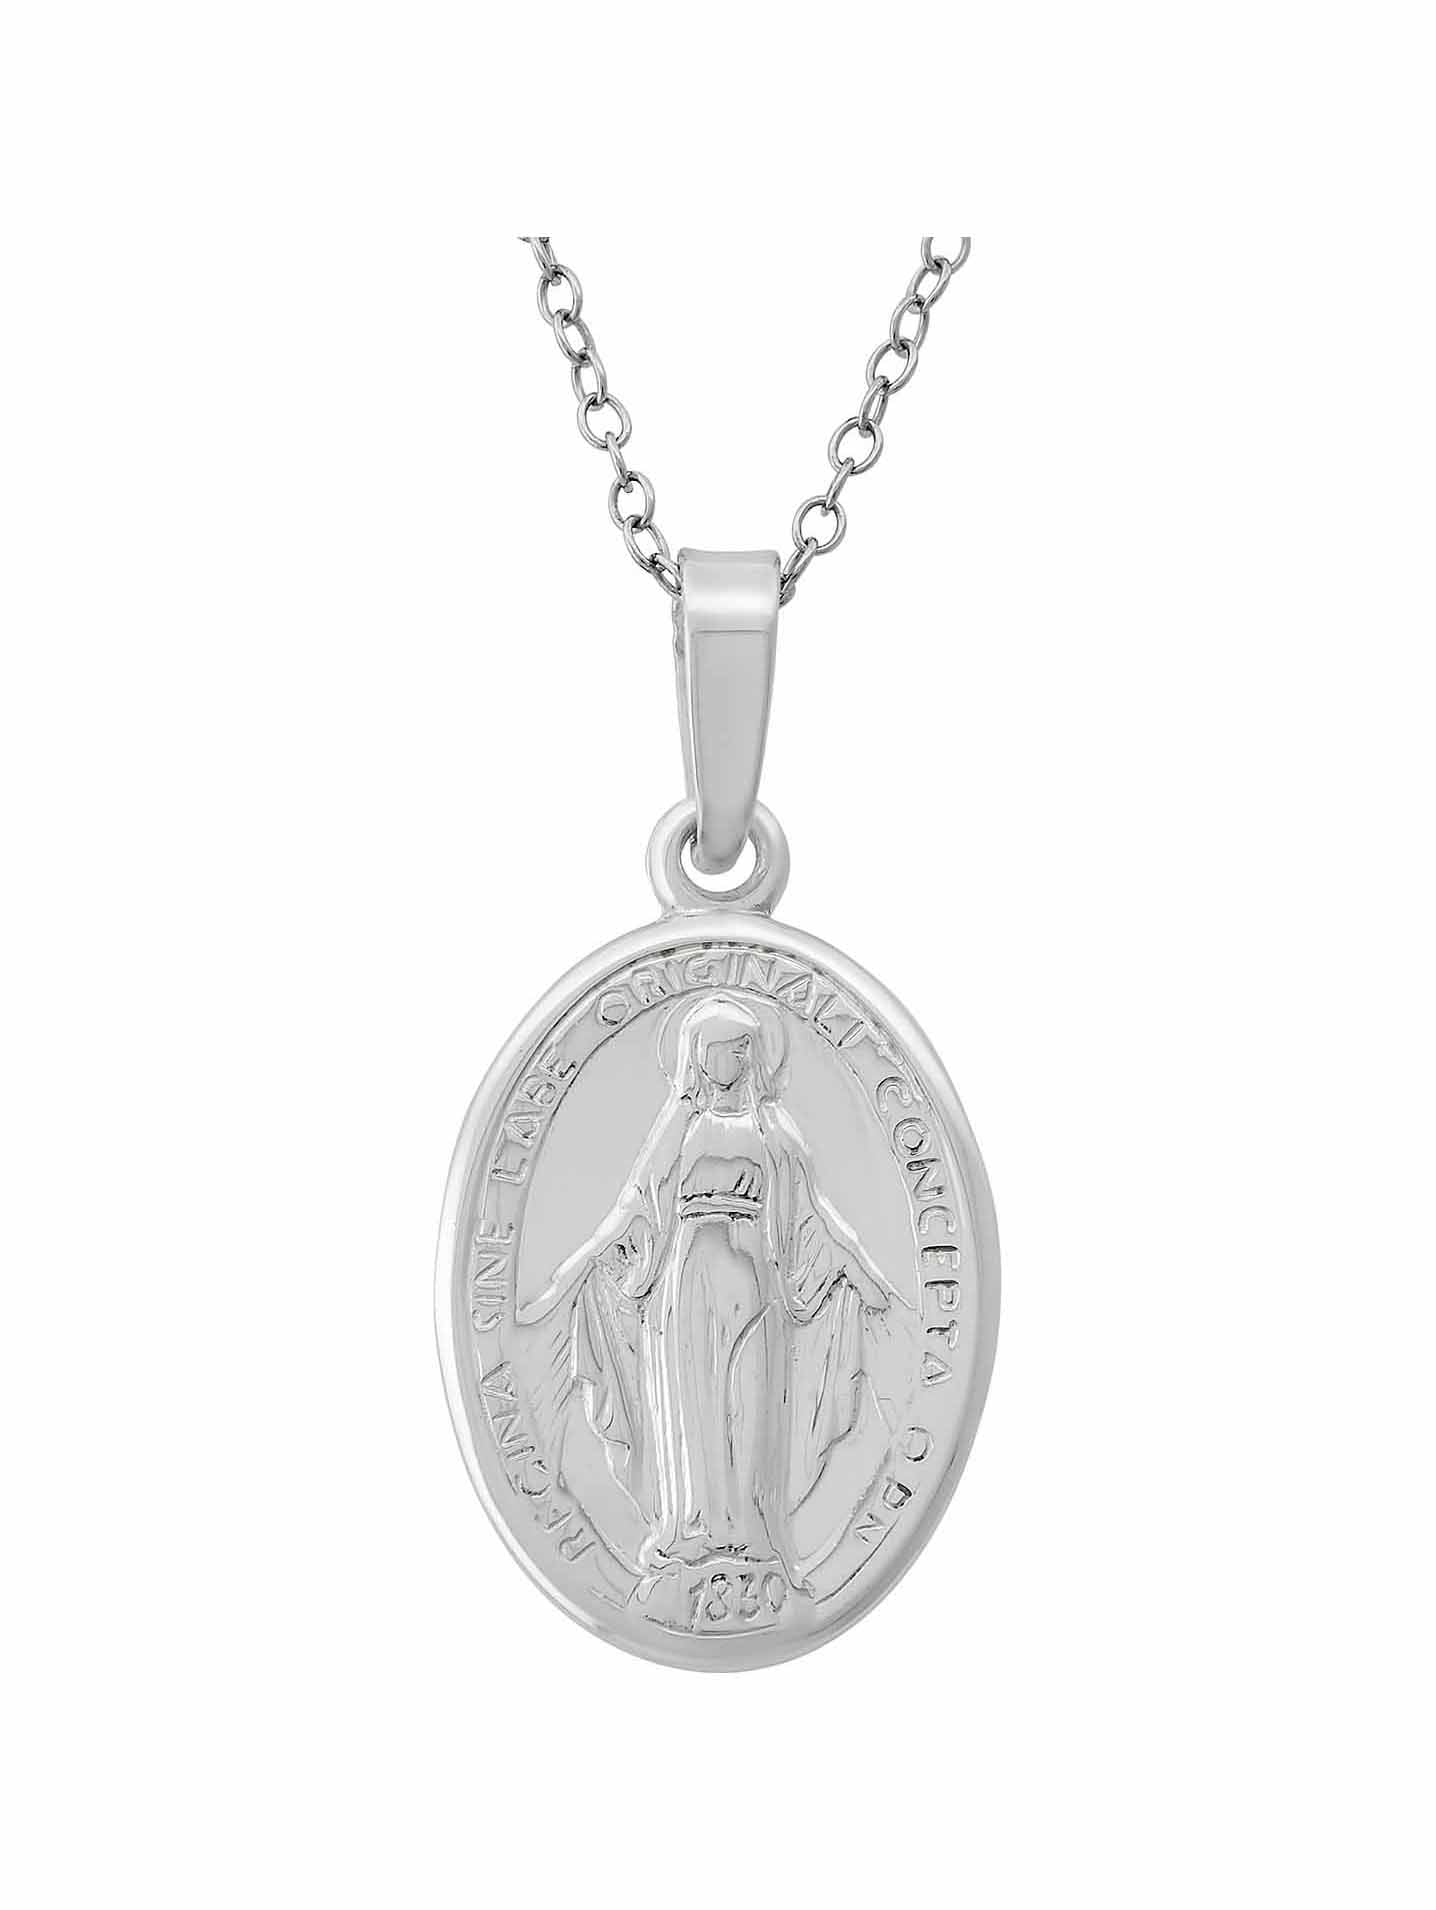 STERLING SILVER VIRGIN MARY CHARM/PENDANT 